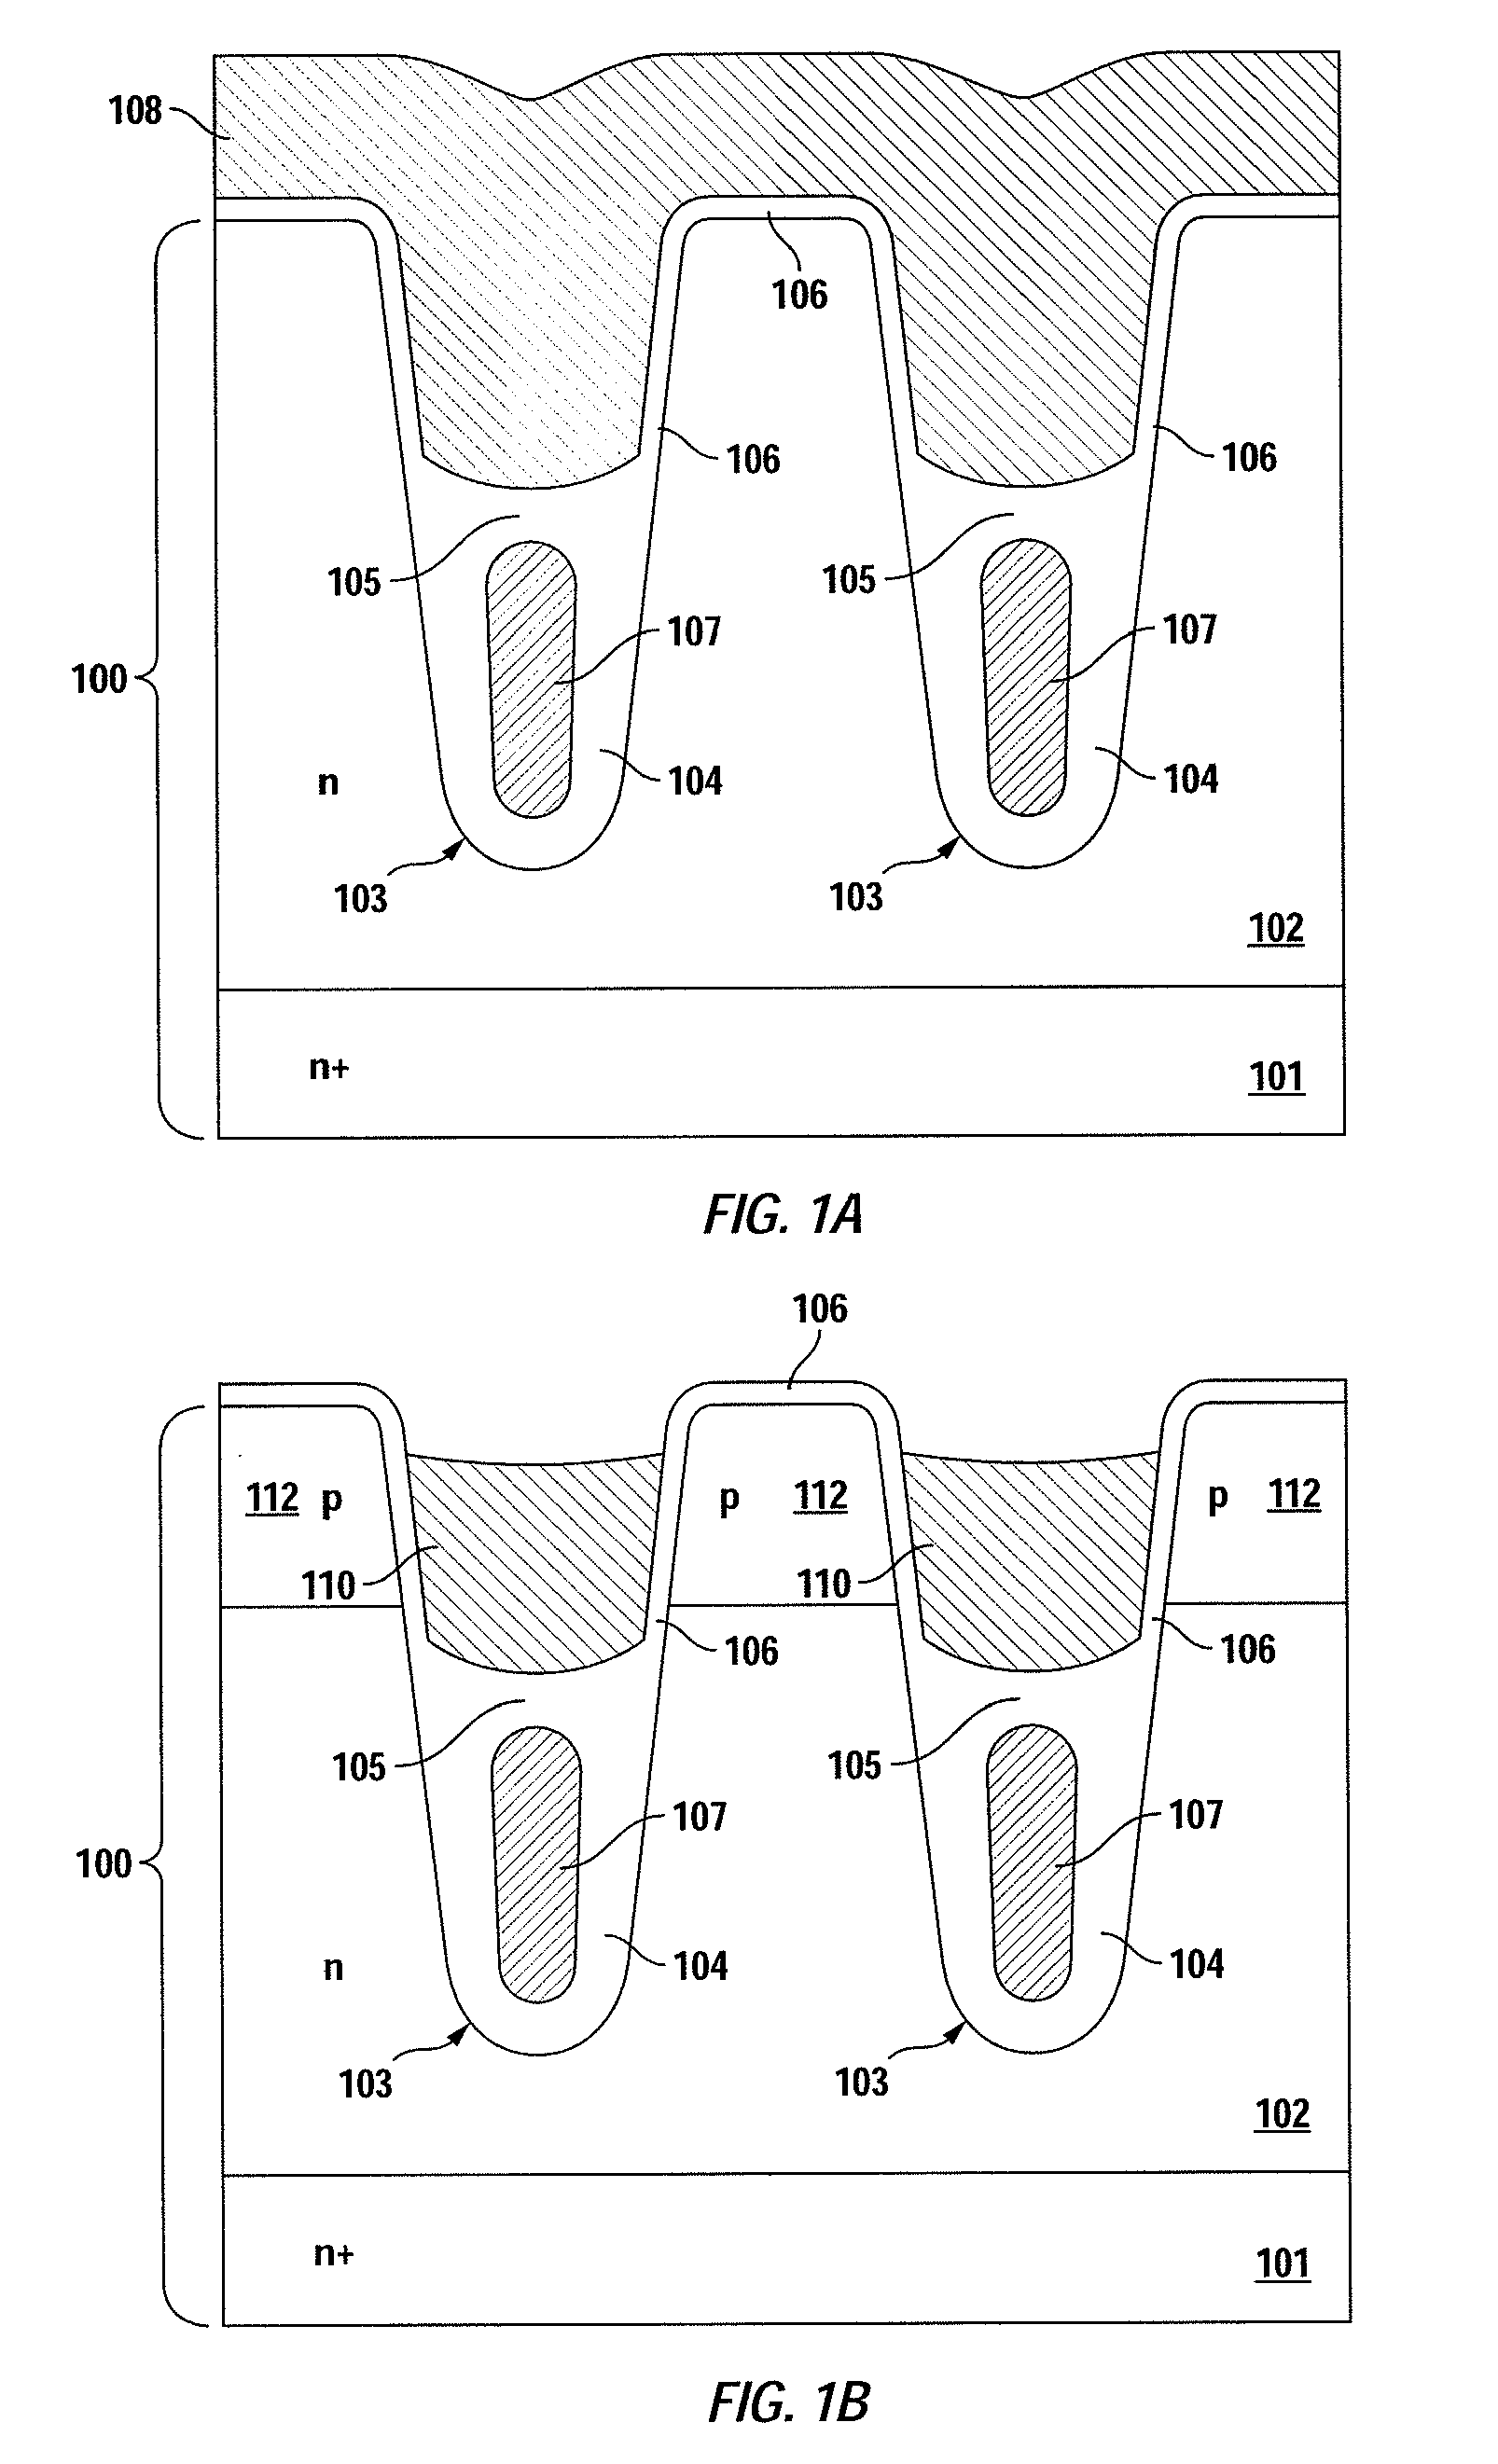 Structure and Method for Forming a Salicide on the Gate Electrode of a Trench-Gate FET